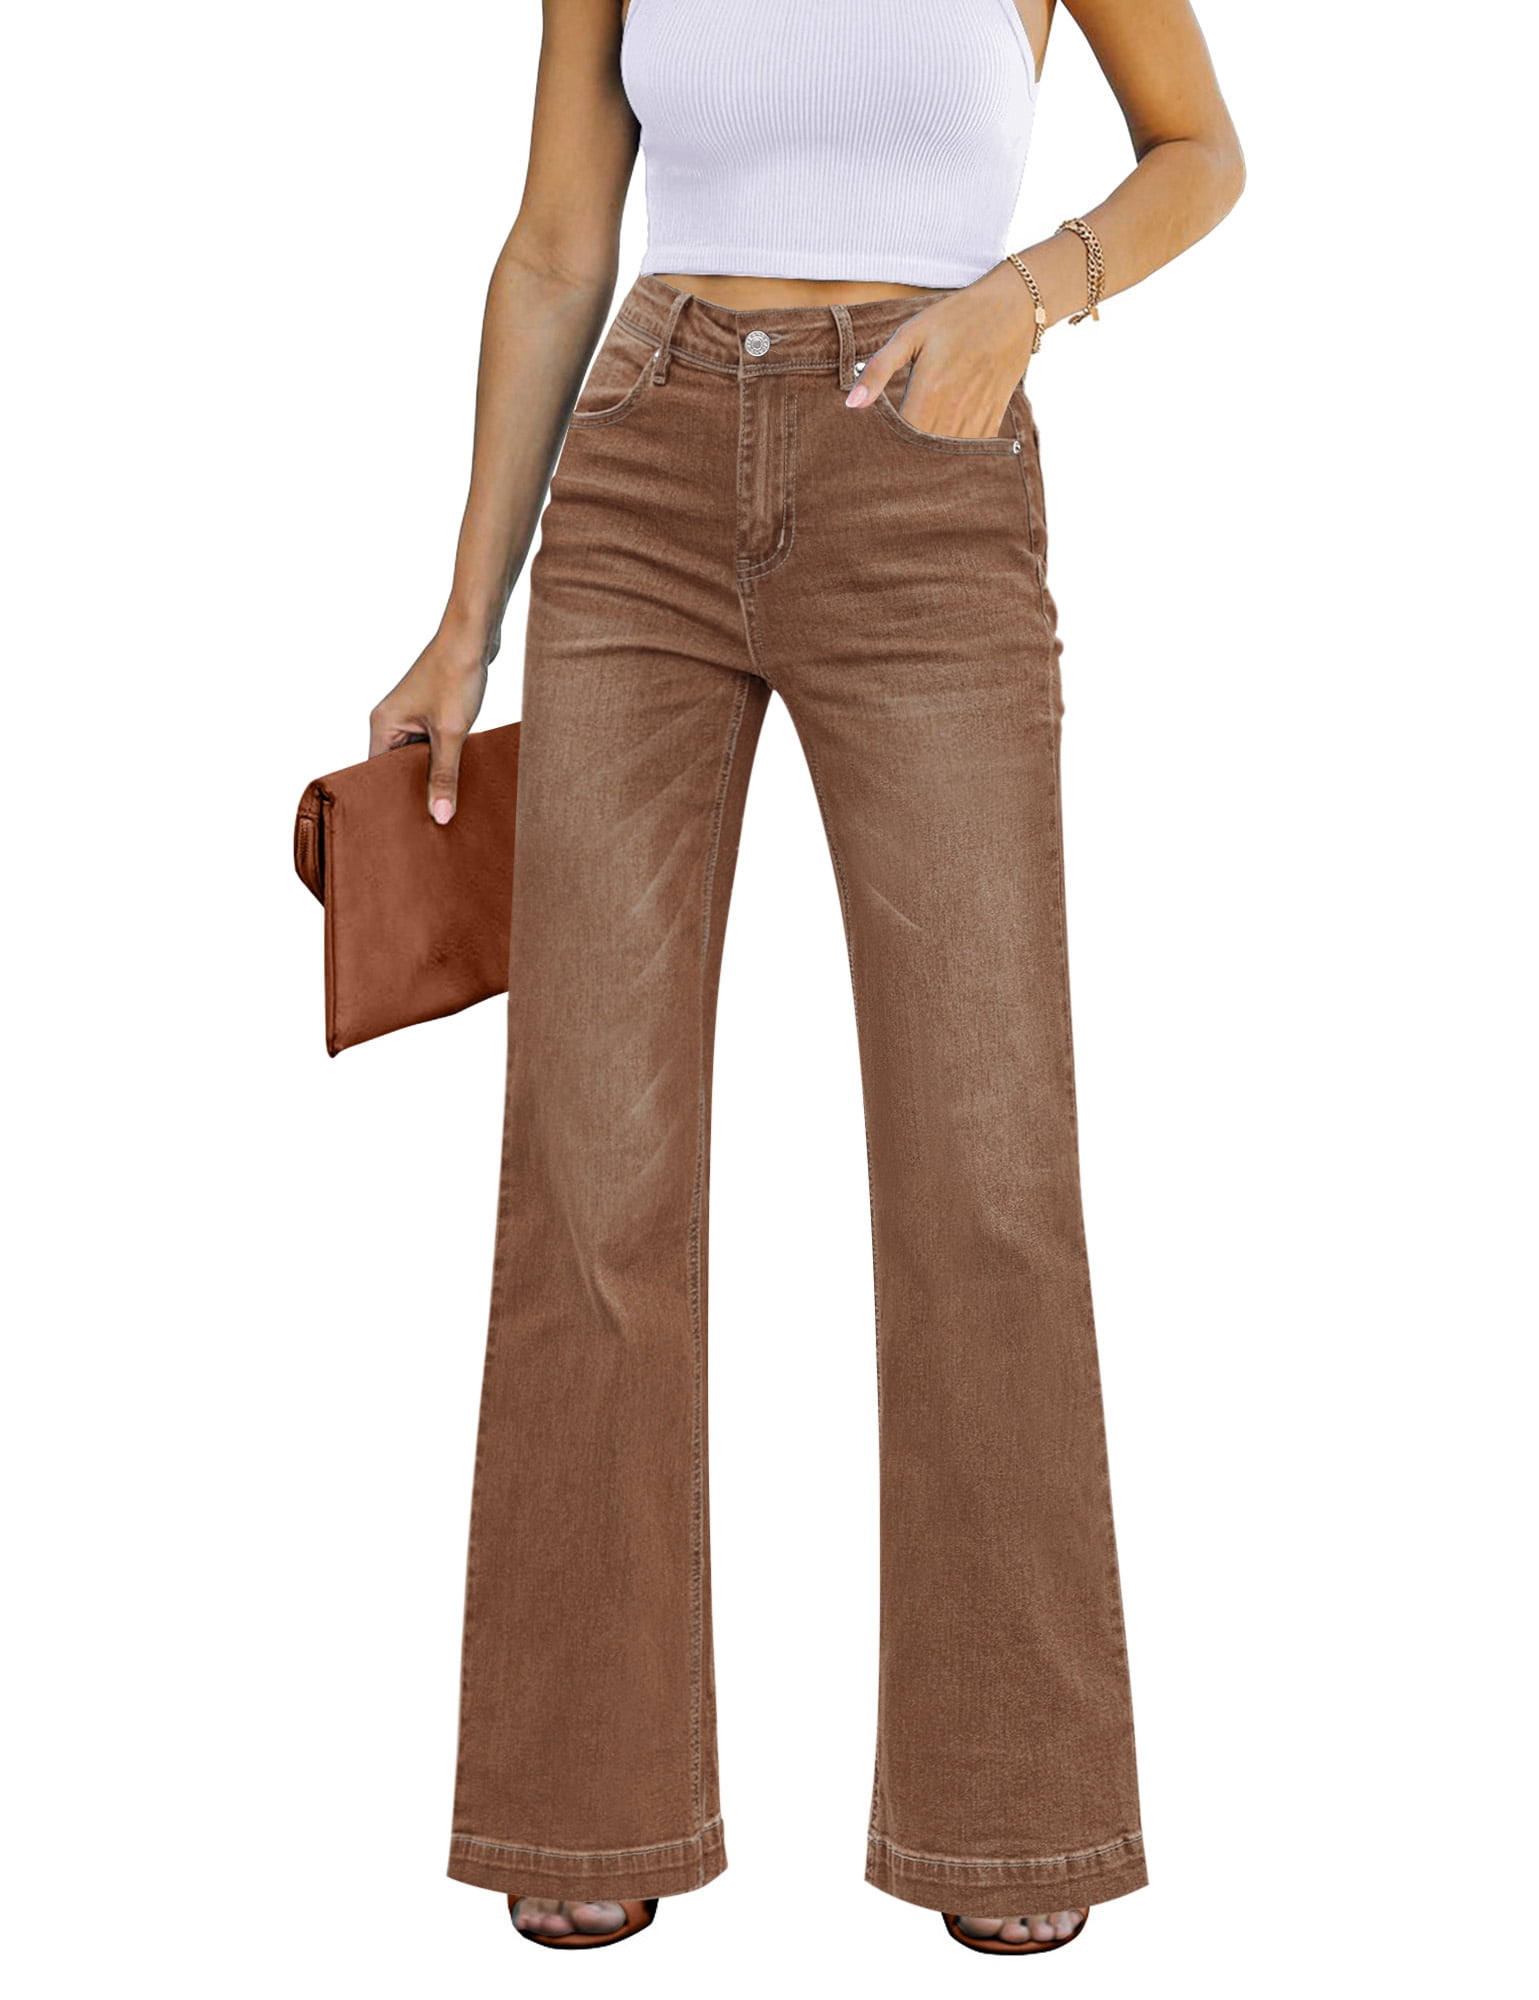 Vetinee Wide Leg Jeans for Women Summer Fall Casual Fitted High Waisted  Stretch Denim Pants Size M Size 8 Size 10 Pecan Brown